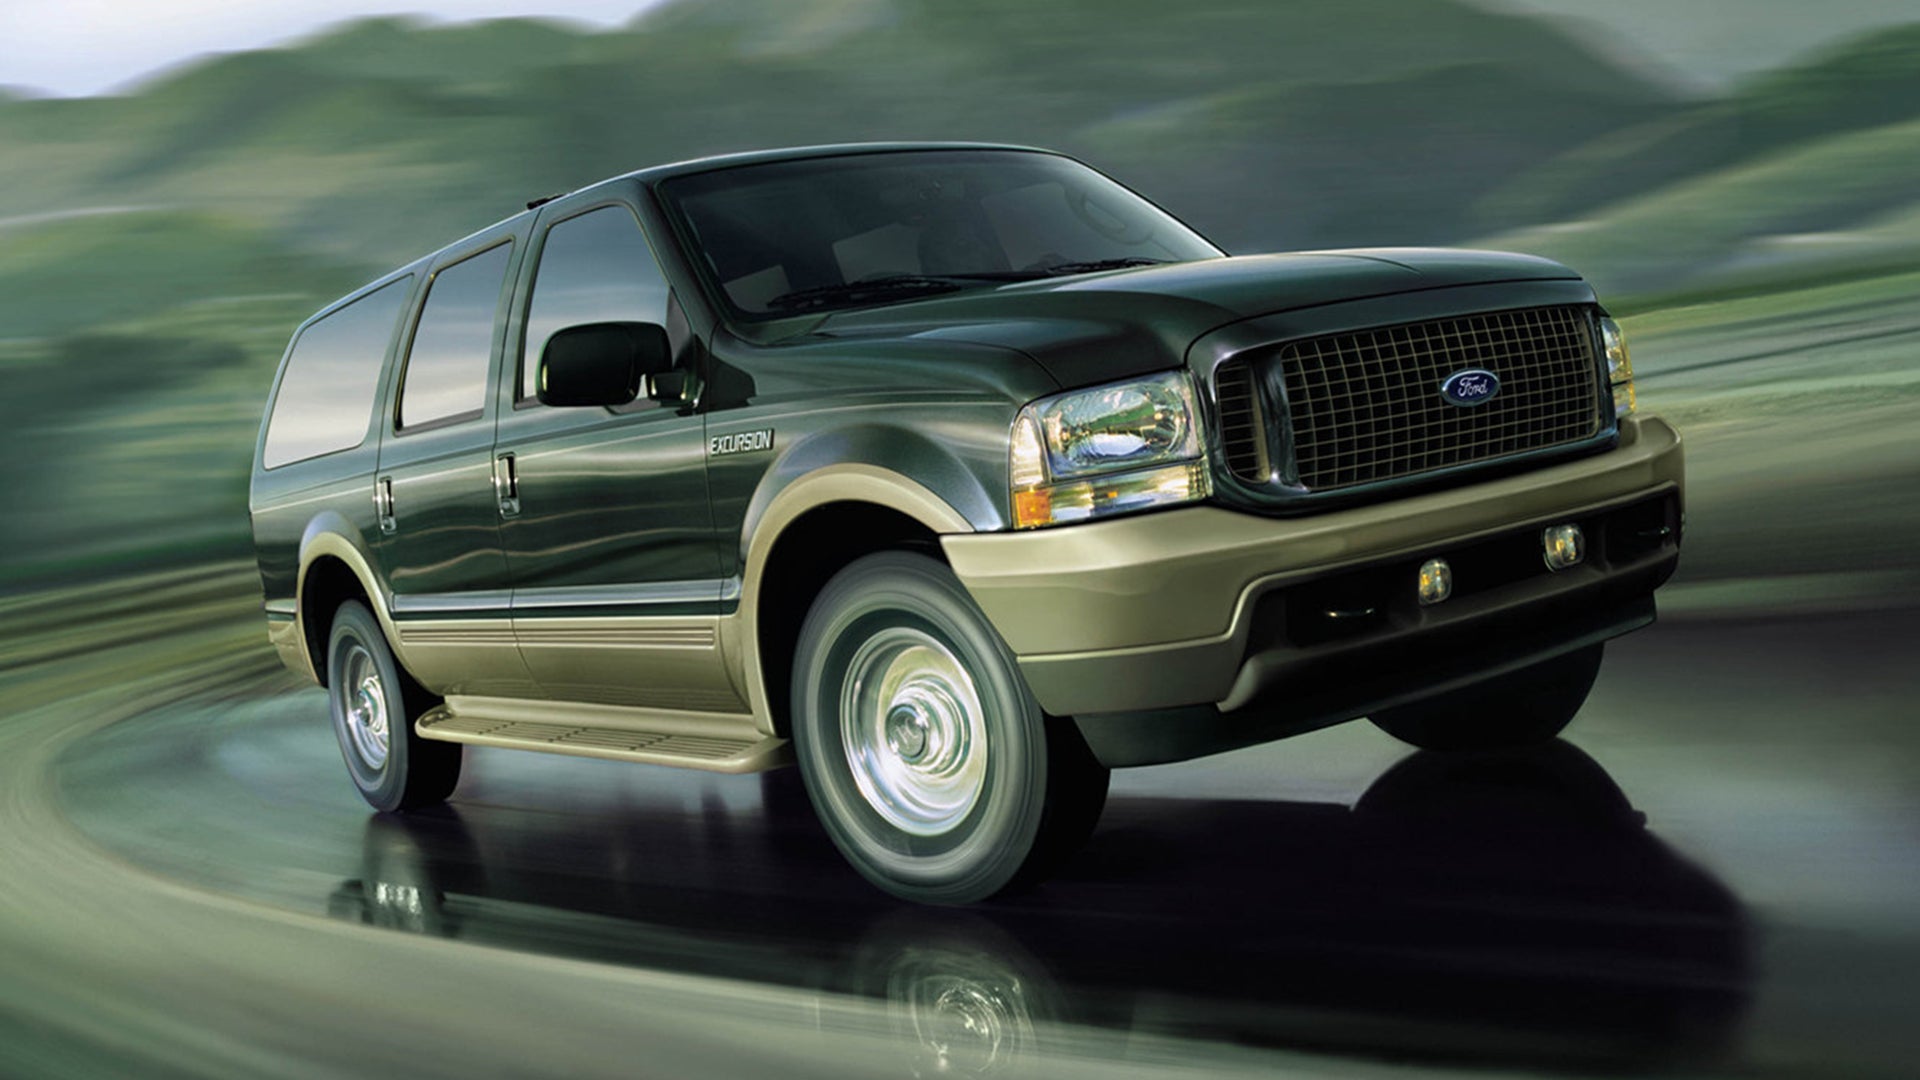 Ford Excursion Trademark Gets Renewed